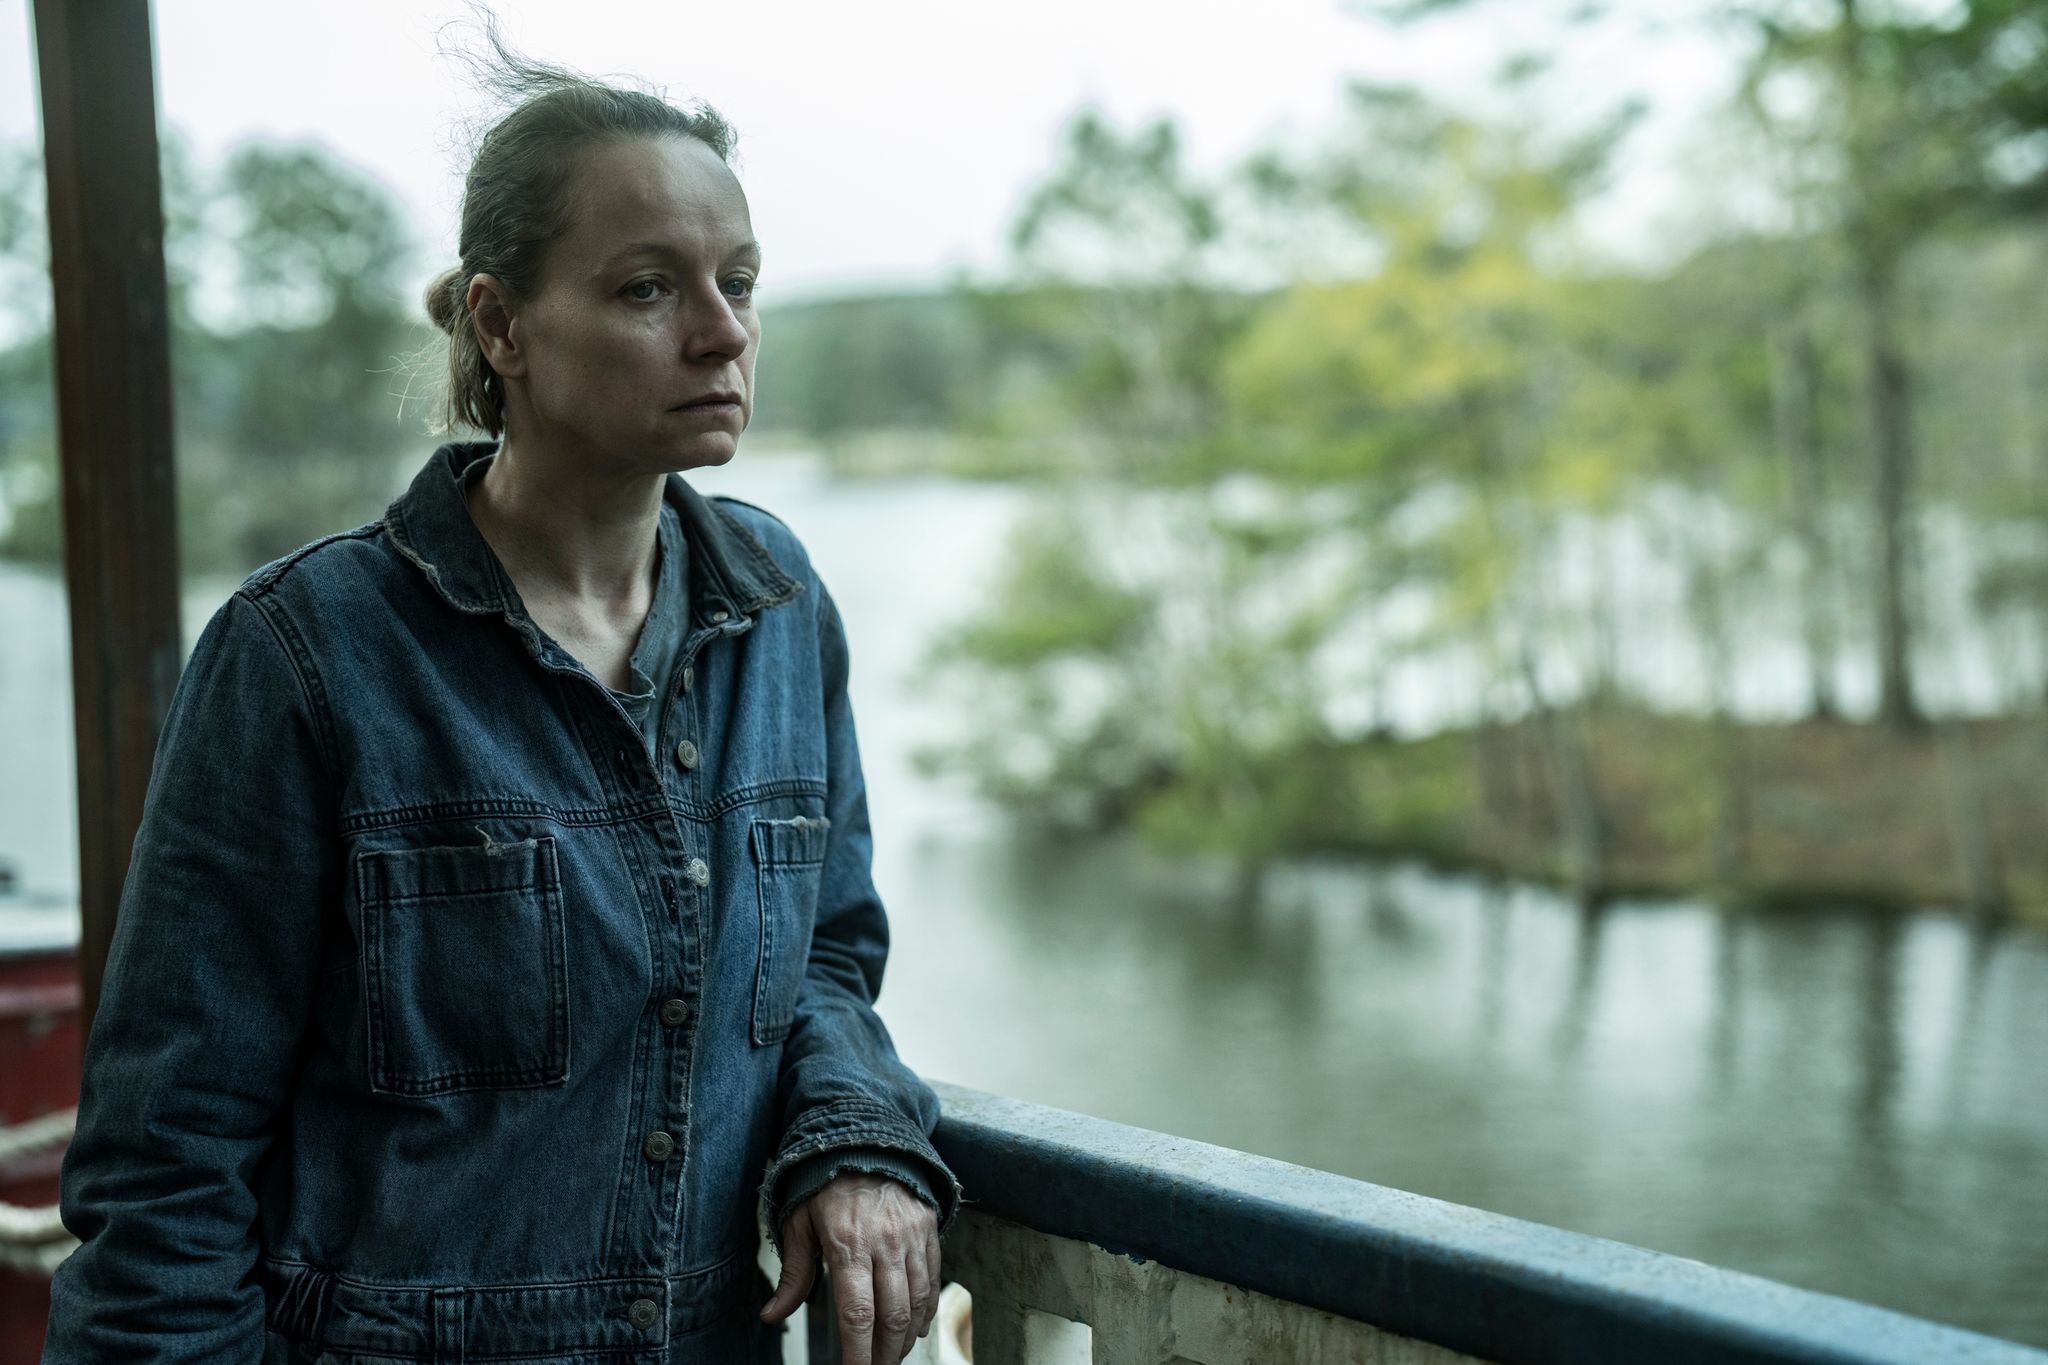 Samantha Morton in character as Alpha in Tales of the Walking Dead looking pensive beside a lake